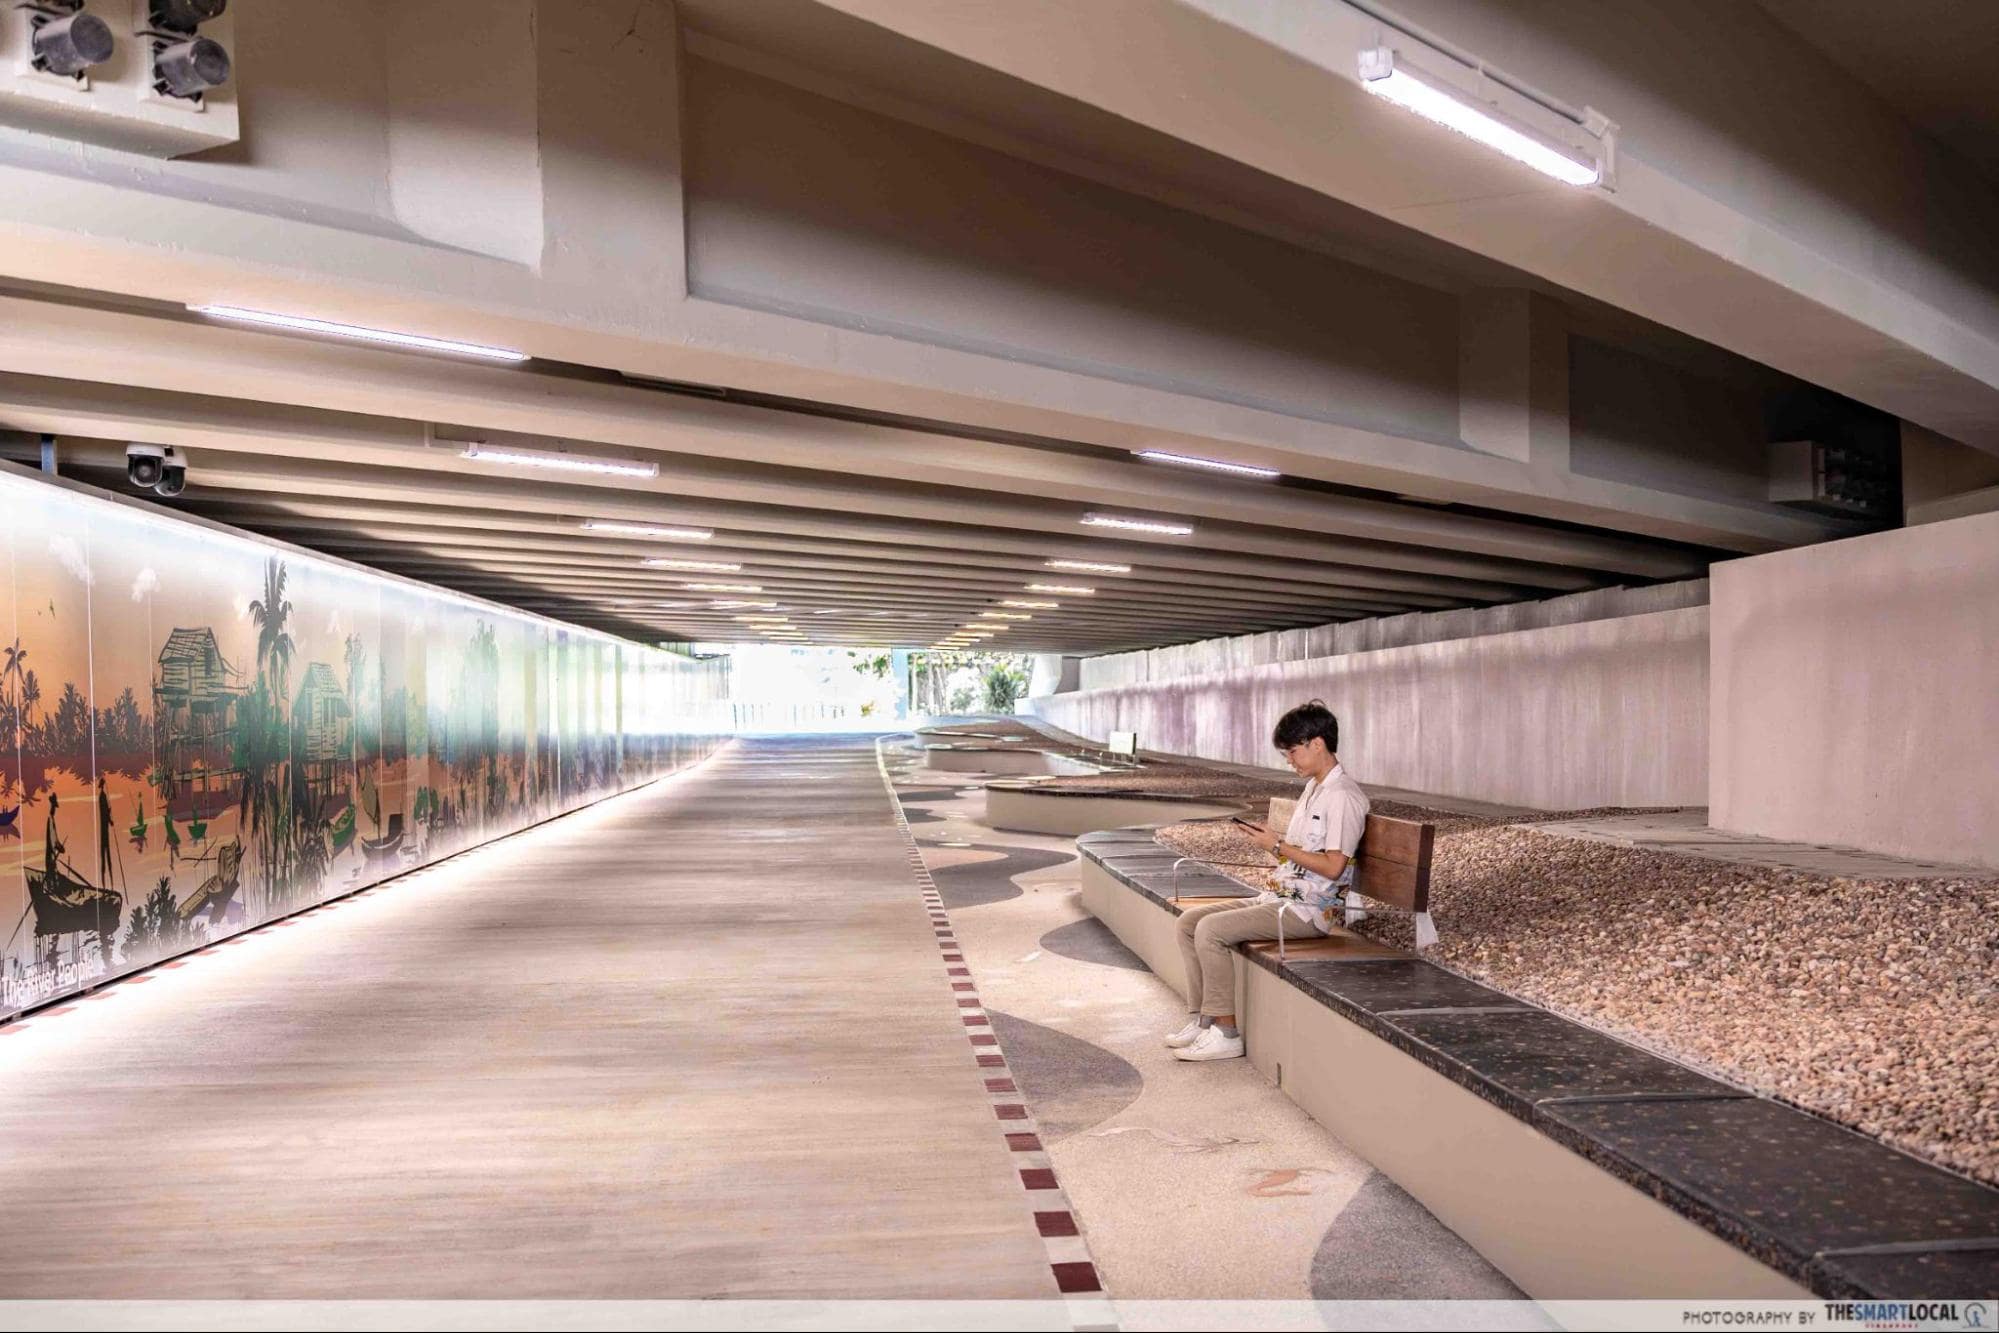 Bishan-to-City-Links - Benches At Upgraded CTE Underpass Wide